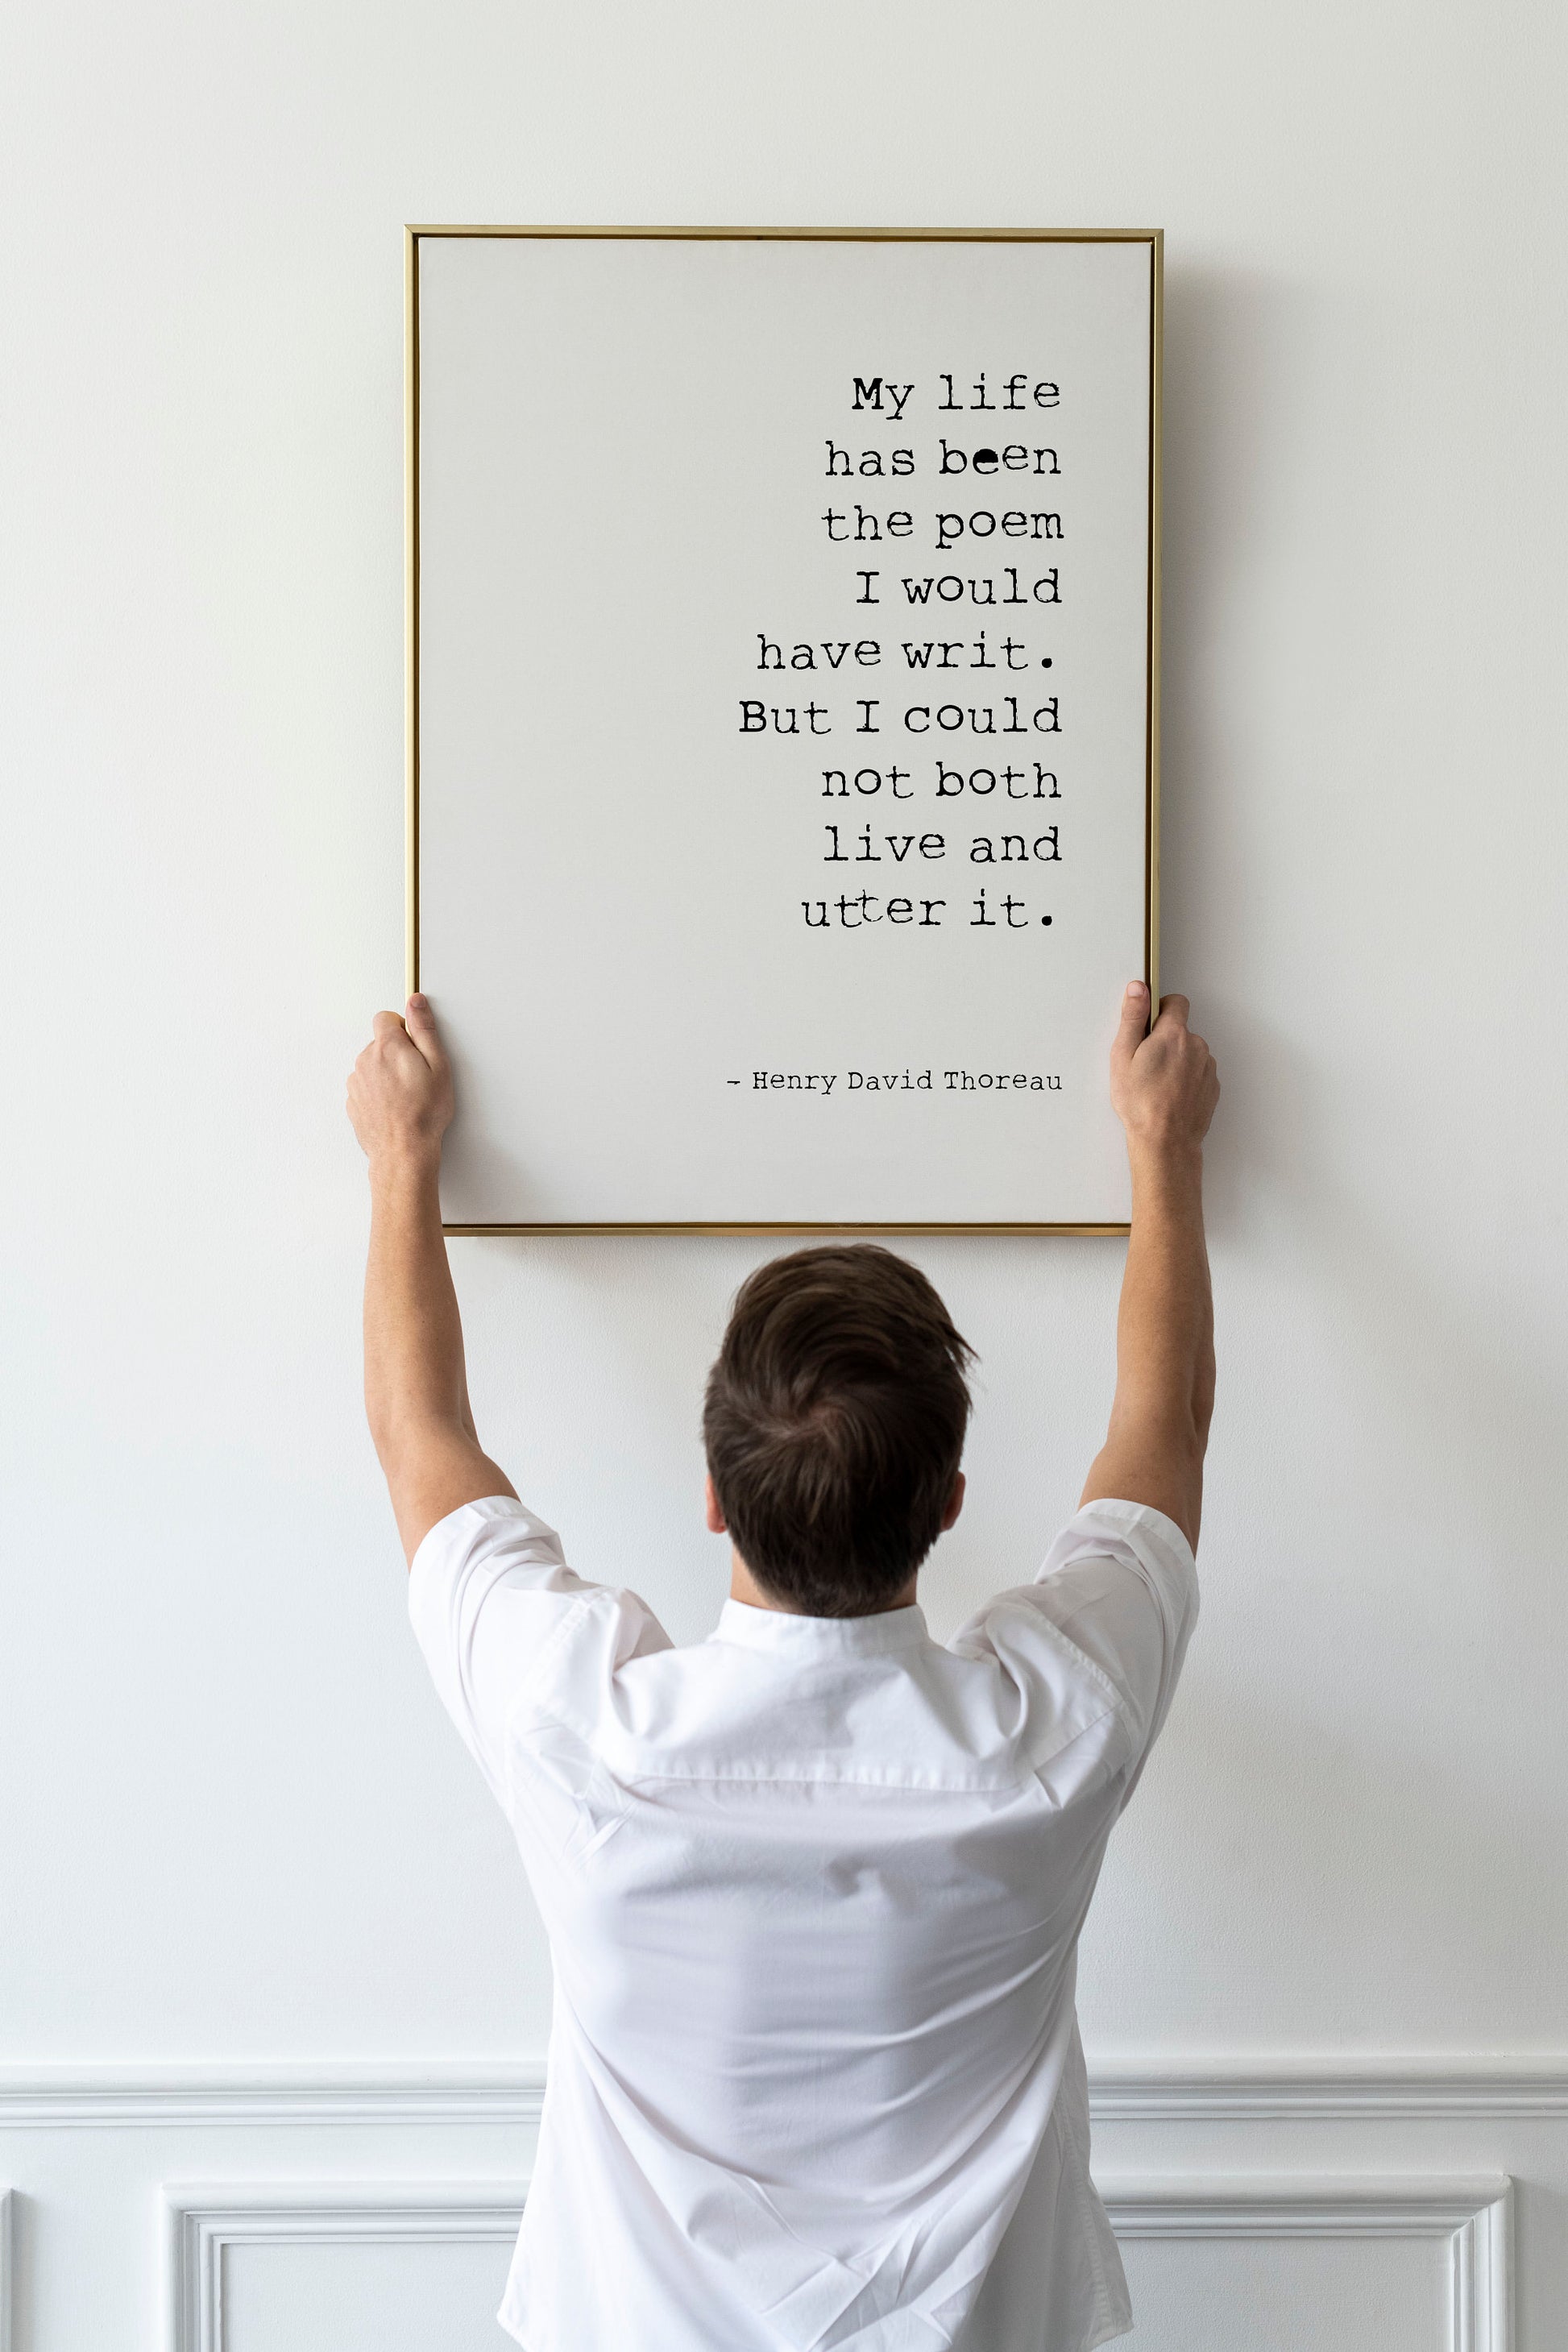 Poet's quote by Henri David Thoreau - My life has been the poem I would have writ print - framed poem quote poster